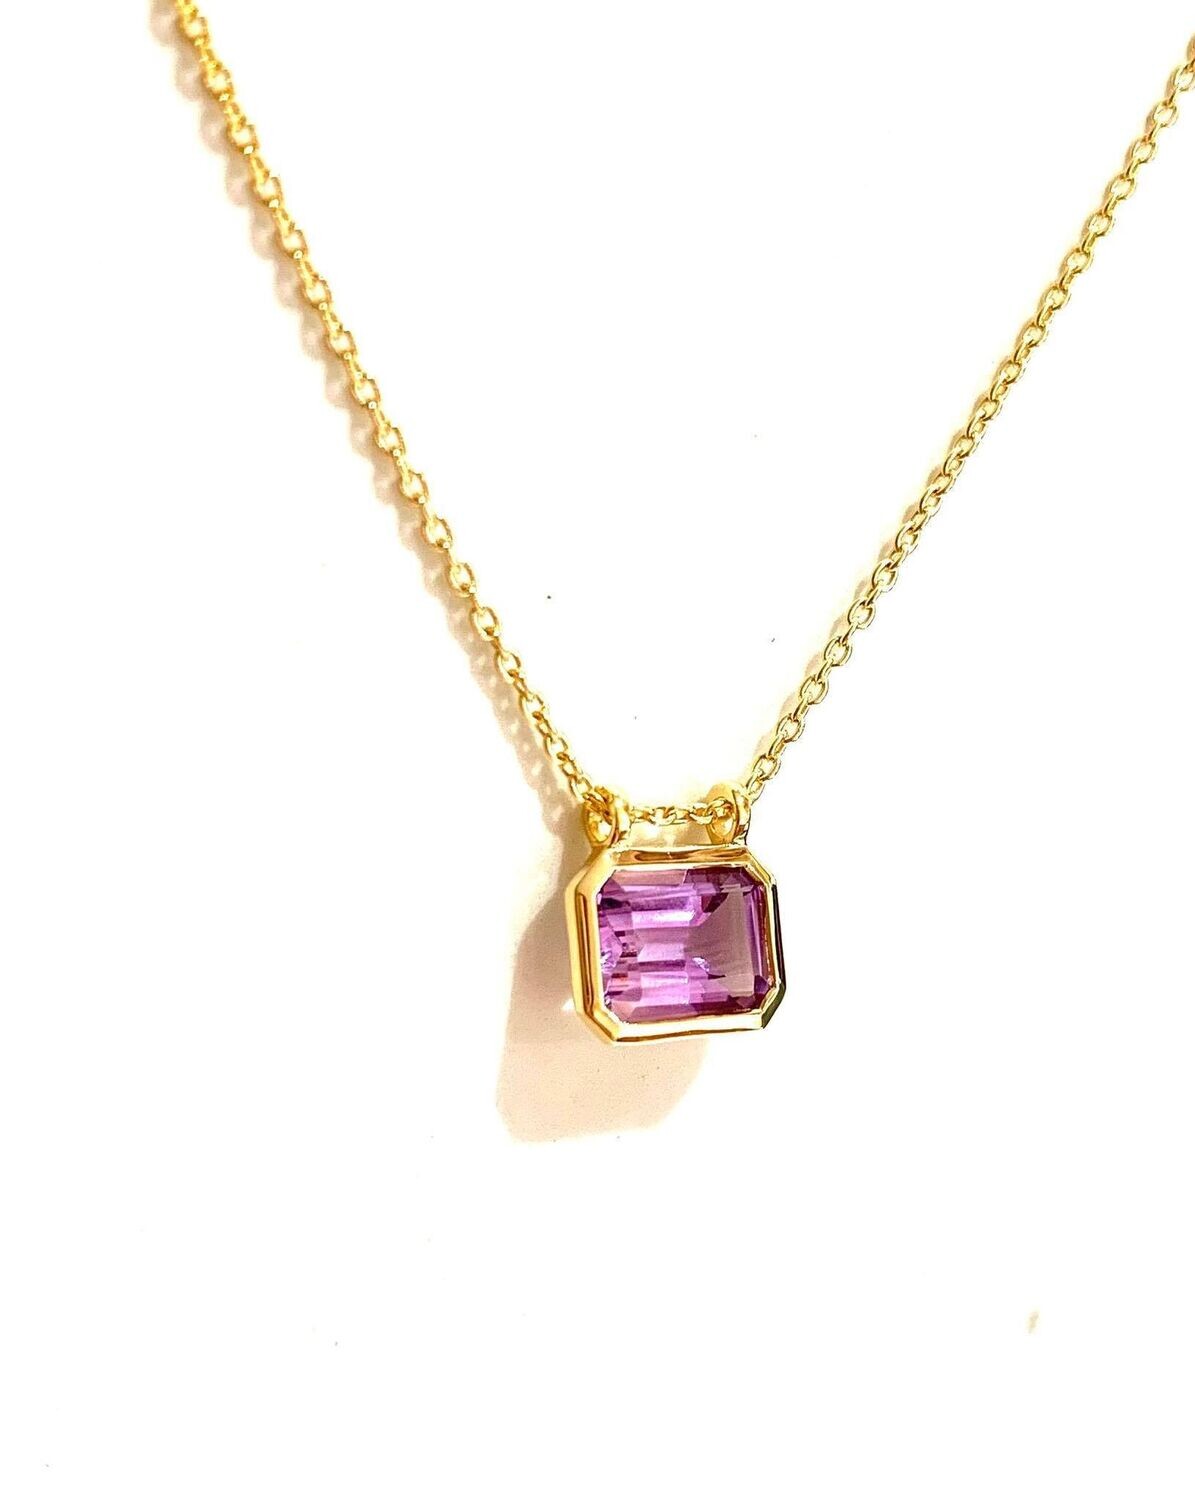 New Silver & Gold Plated Amethyst Necklace